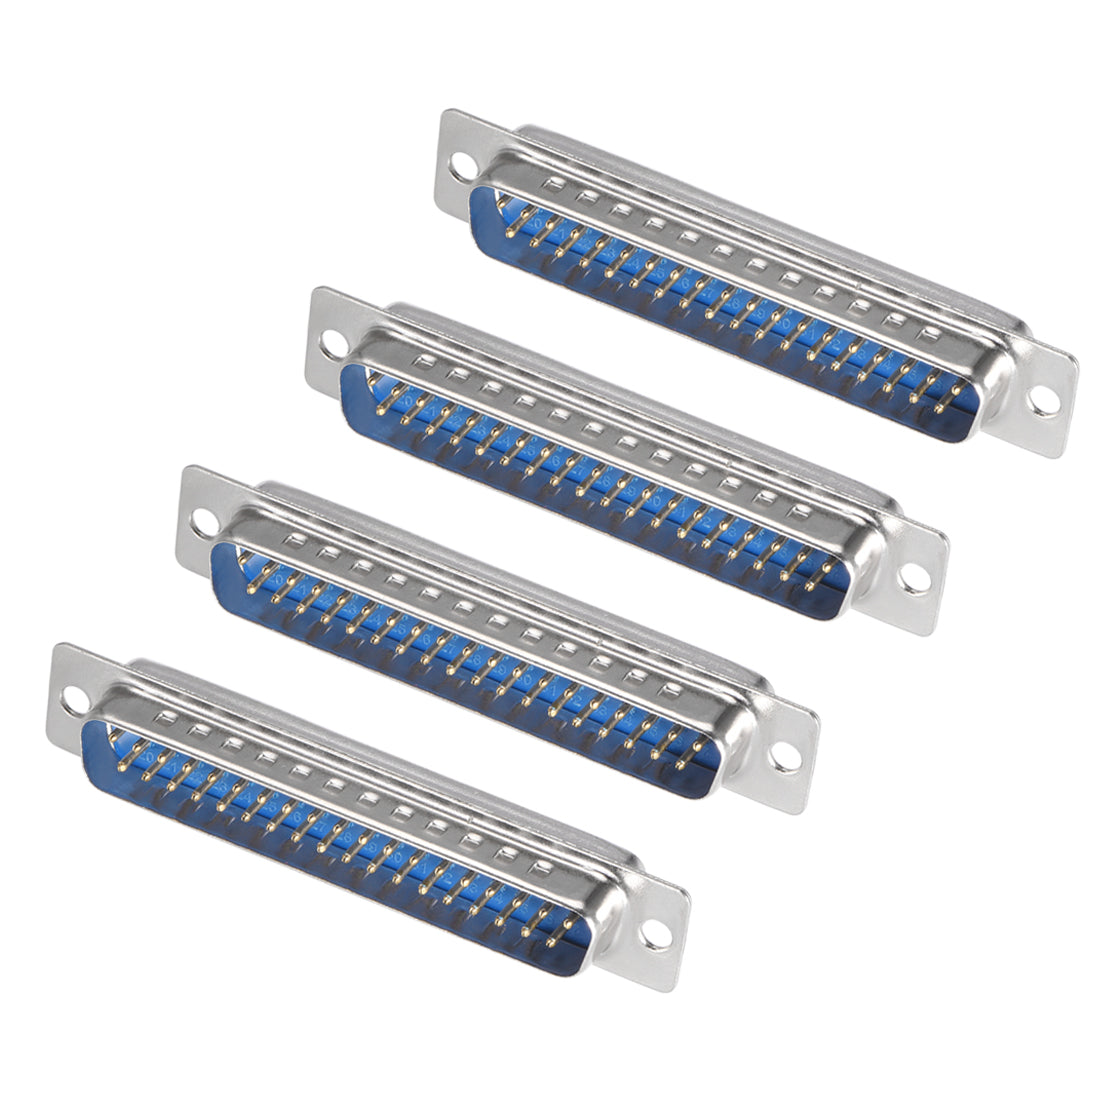 uxcell Uxcell D-sub Connector Male Plug 37-pin 2-row Port Terminal Breakout Solder Type for Mechanical Equipment CNC Computers Blue 4pcs